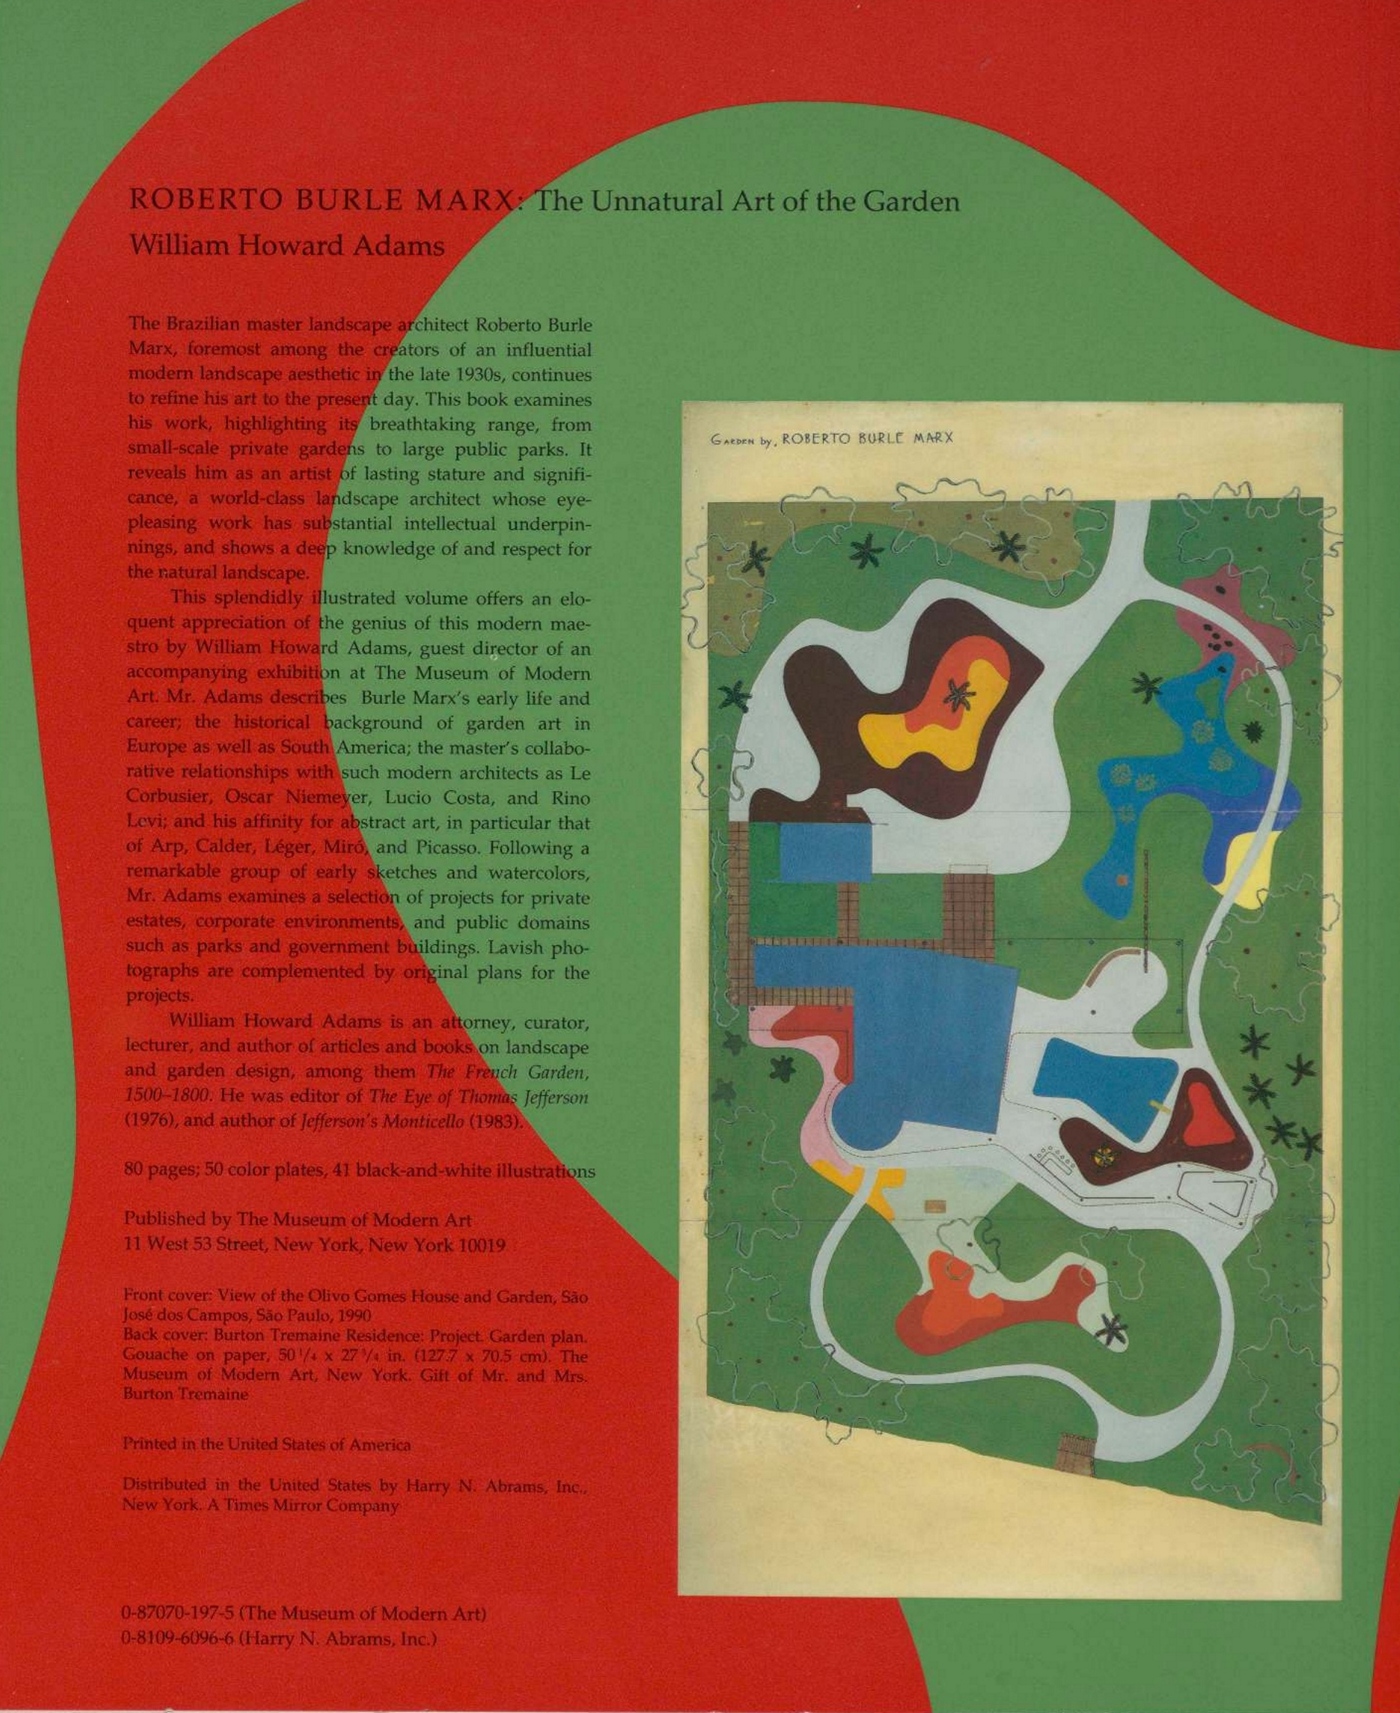 Roberto Burle Marx : The Unnatural Art of the Garden / by William Howard Adams. — New York : The Museum of Modern Art, 1991